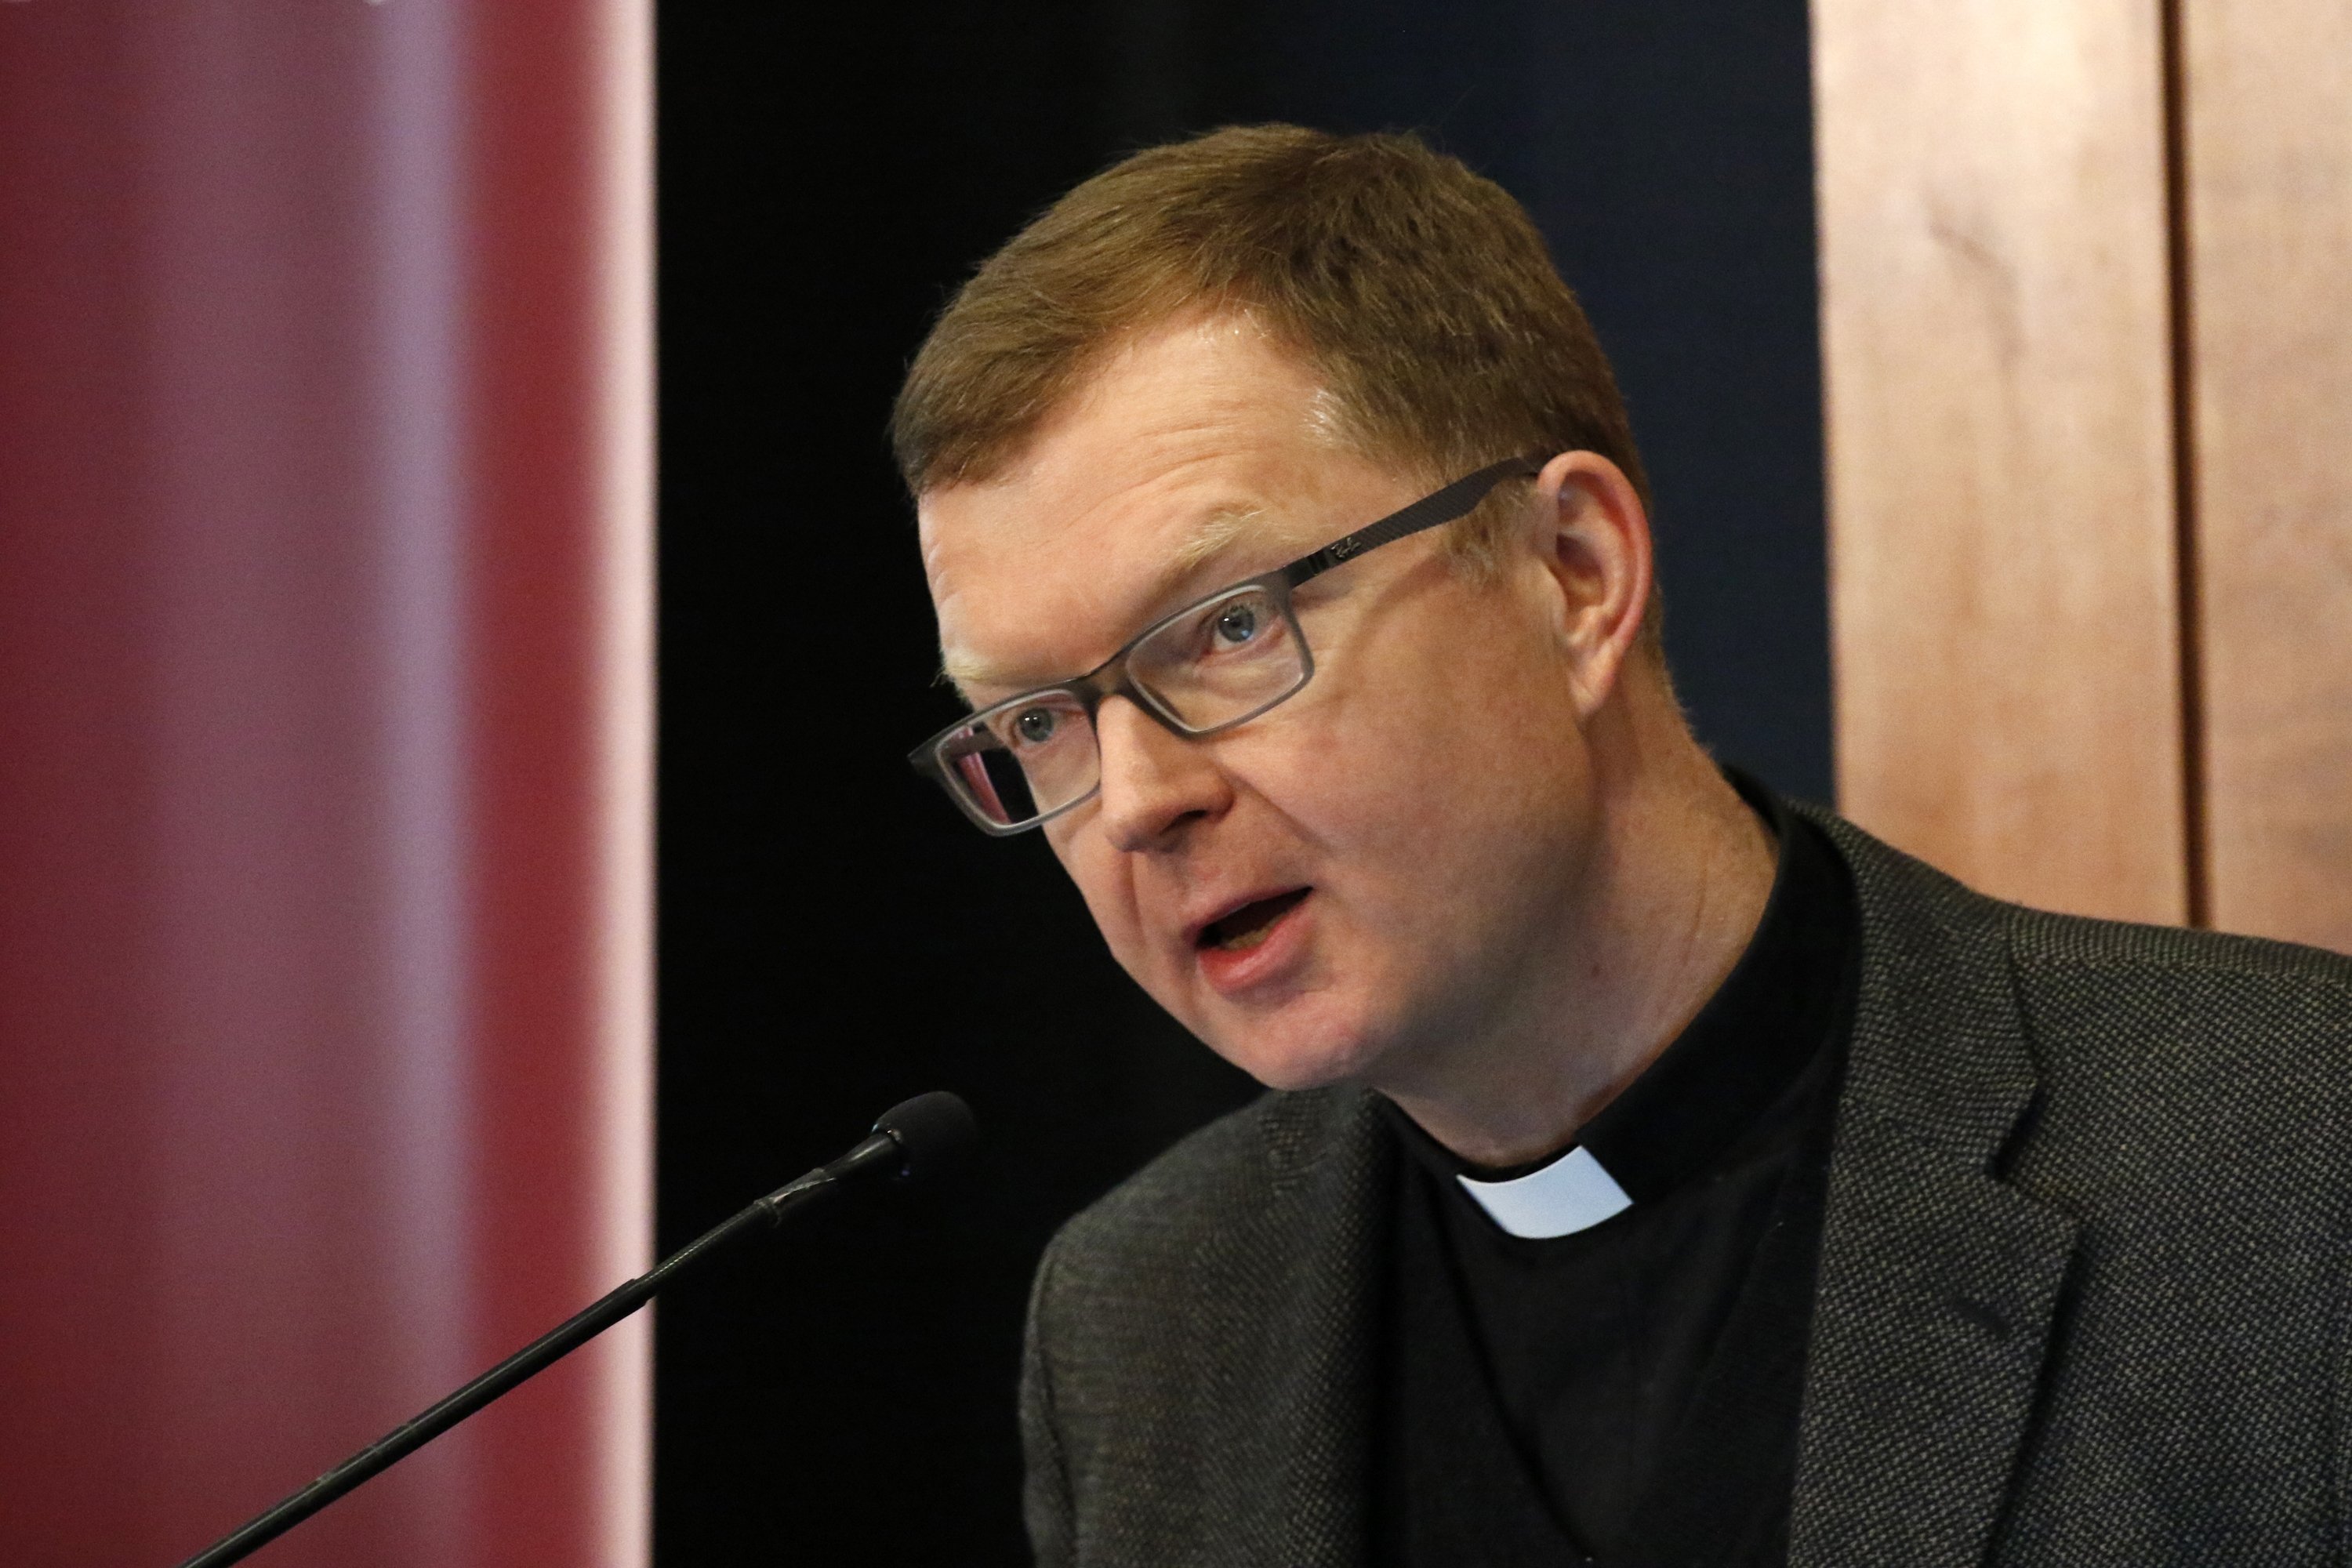 Jesuit Father Hans Zollner speaks during a symposium at Fordham University in New York City in this March 26, 2019, file photo. (CNS photo/Gregory A. Shemitz)